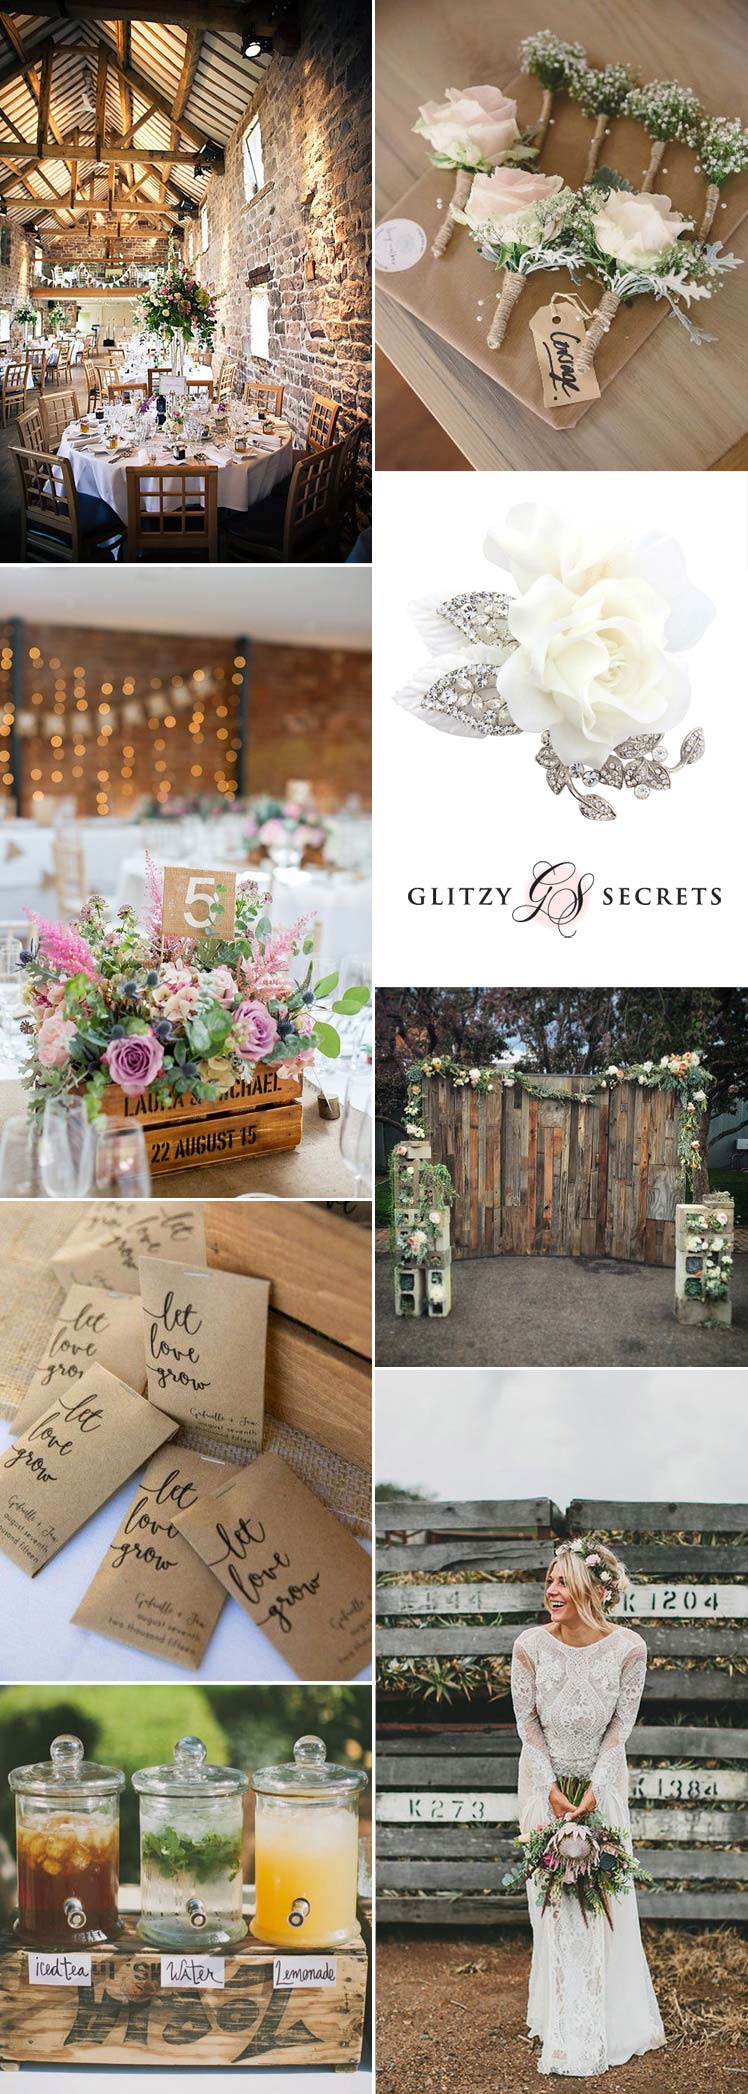 Inspiration for a rustic country wedding theme